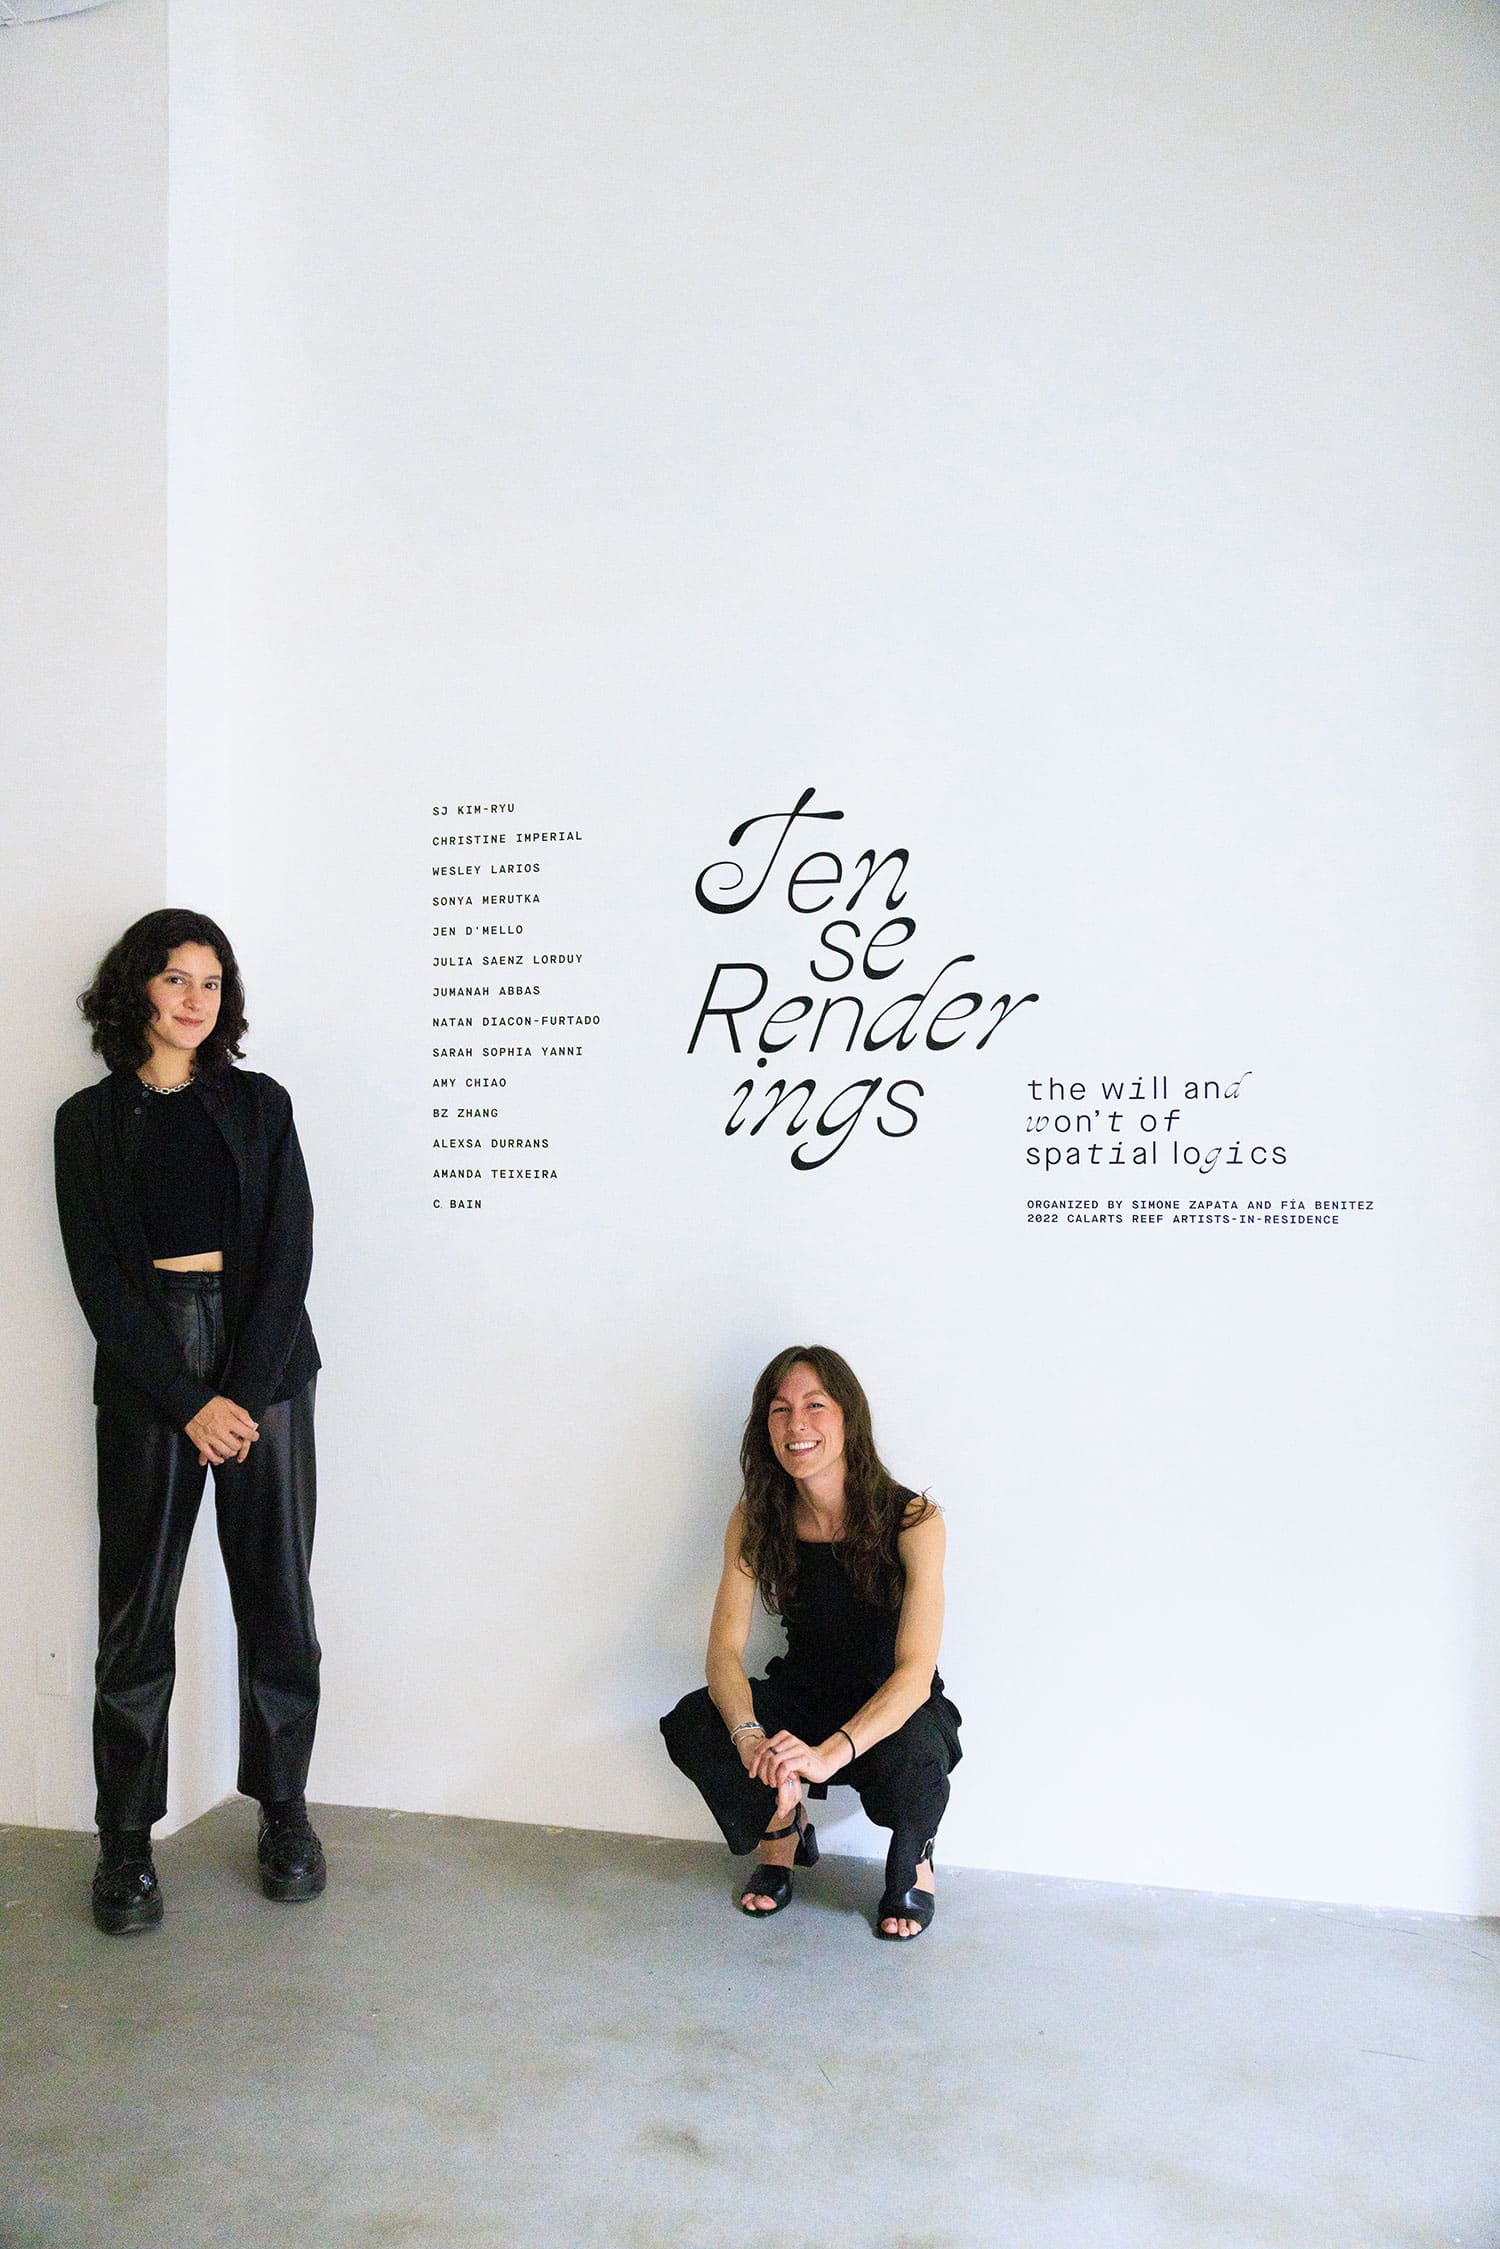 2022 REEF Artists-in-Residence Fía Benitez (standing) and Simone Zapata (crouched) in front of gallery wall featuring 'Tense Renderings' texts and list of artists